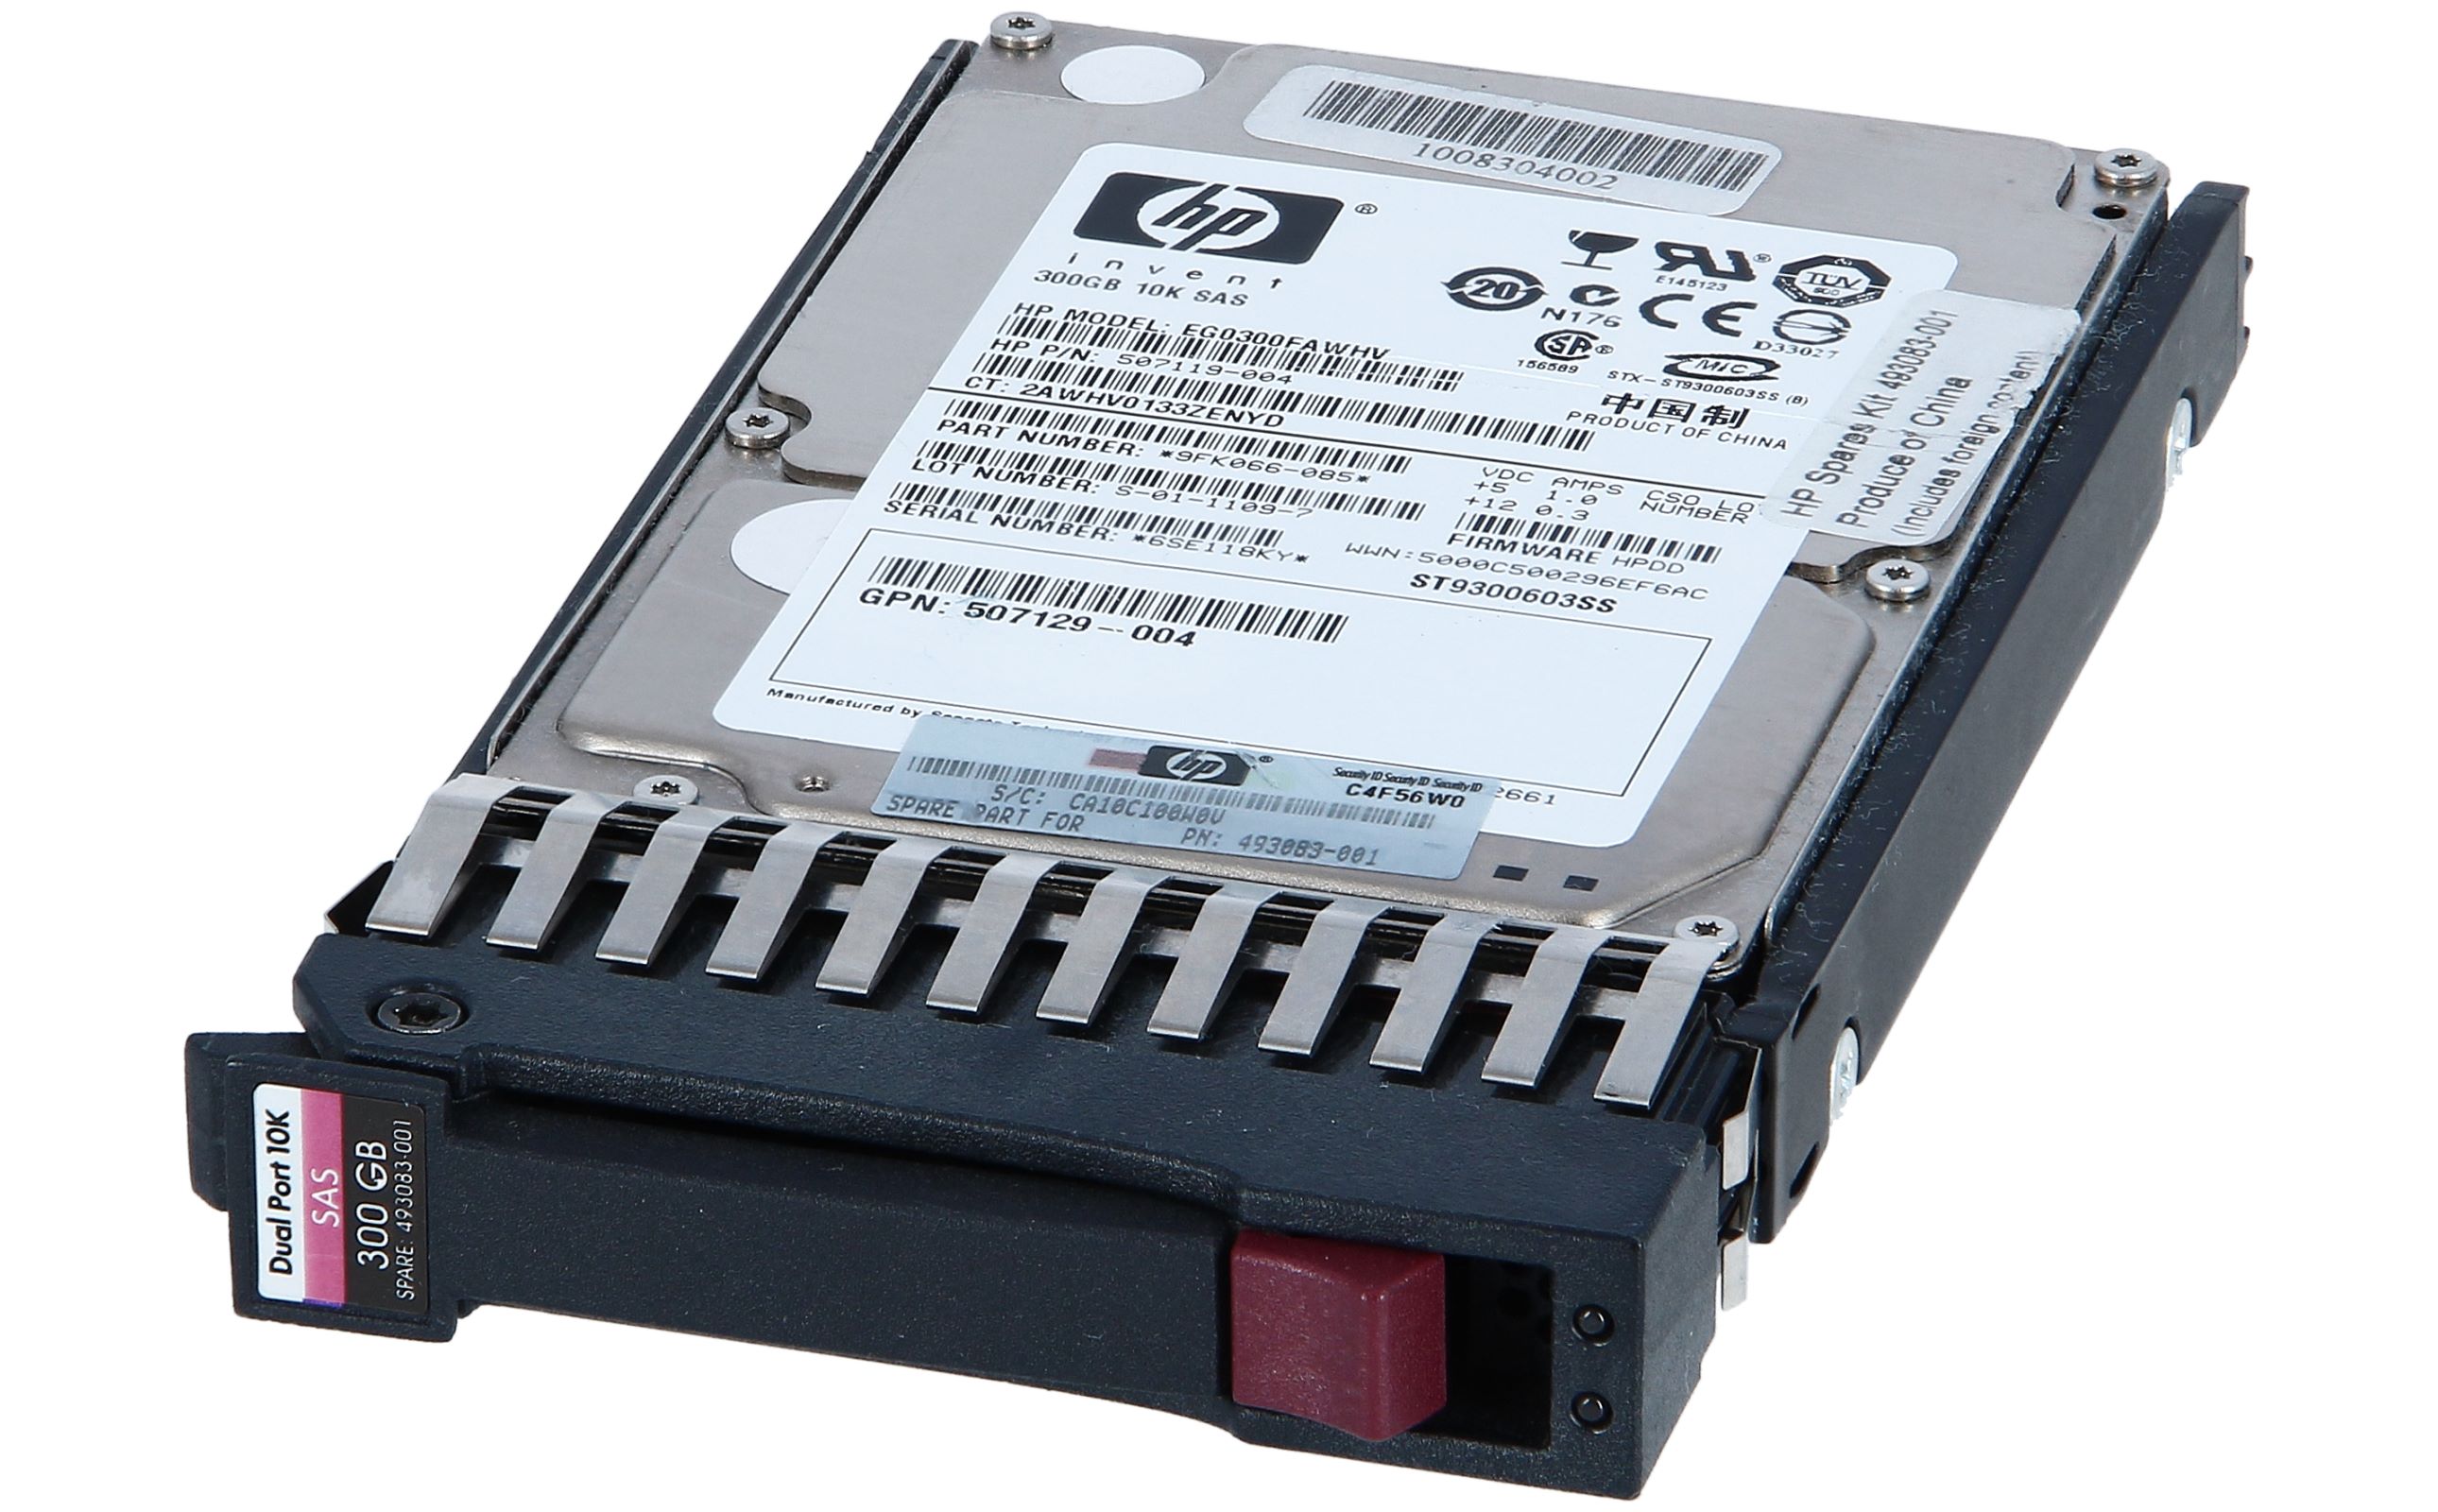 HP - 493083-001 - HP 300GB 3G 10K 2.5" SAS Dual Port Hard Drive new and  refurbished buy online low prices